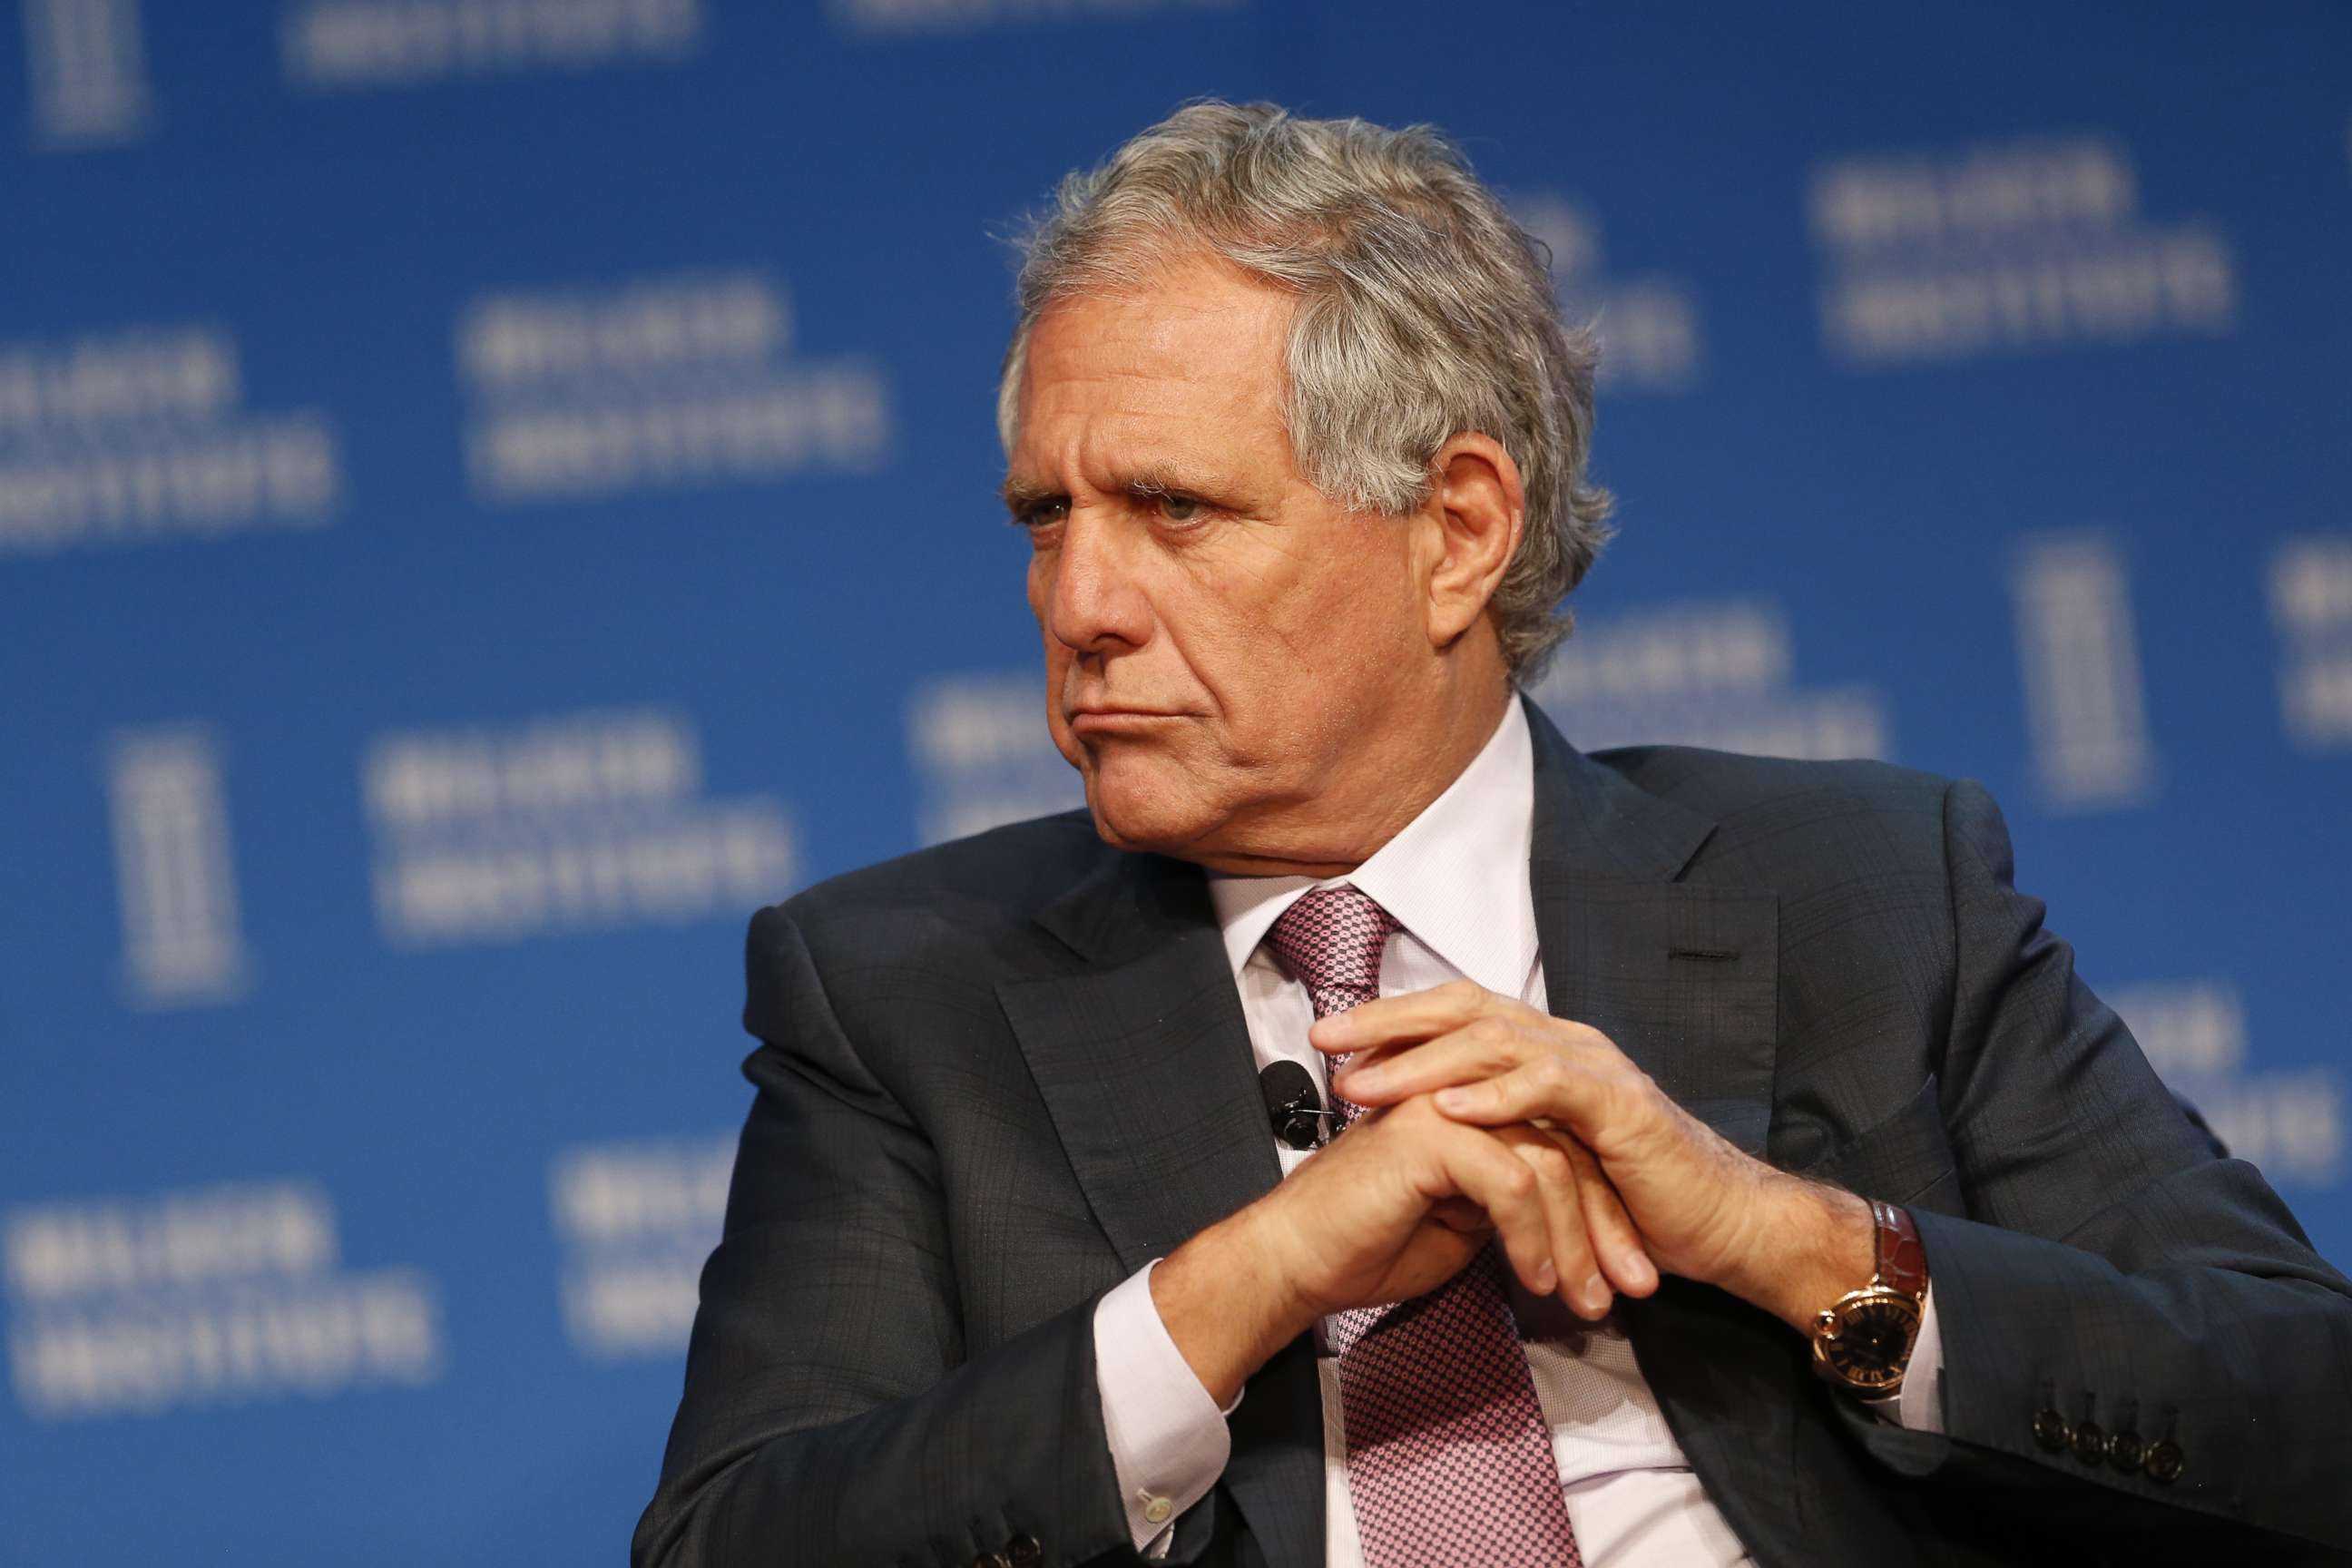 PHOTO: Leslie "Les" Moonves listens during the annual Milken Institute Global Conference in Beverly Hills, Calif., May 4, 2016.